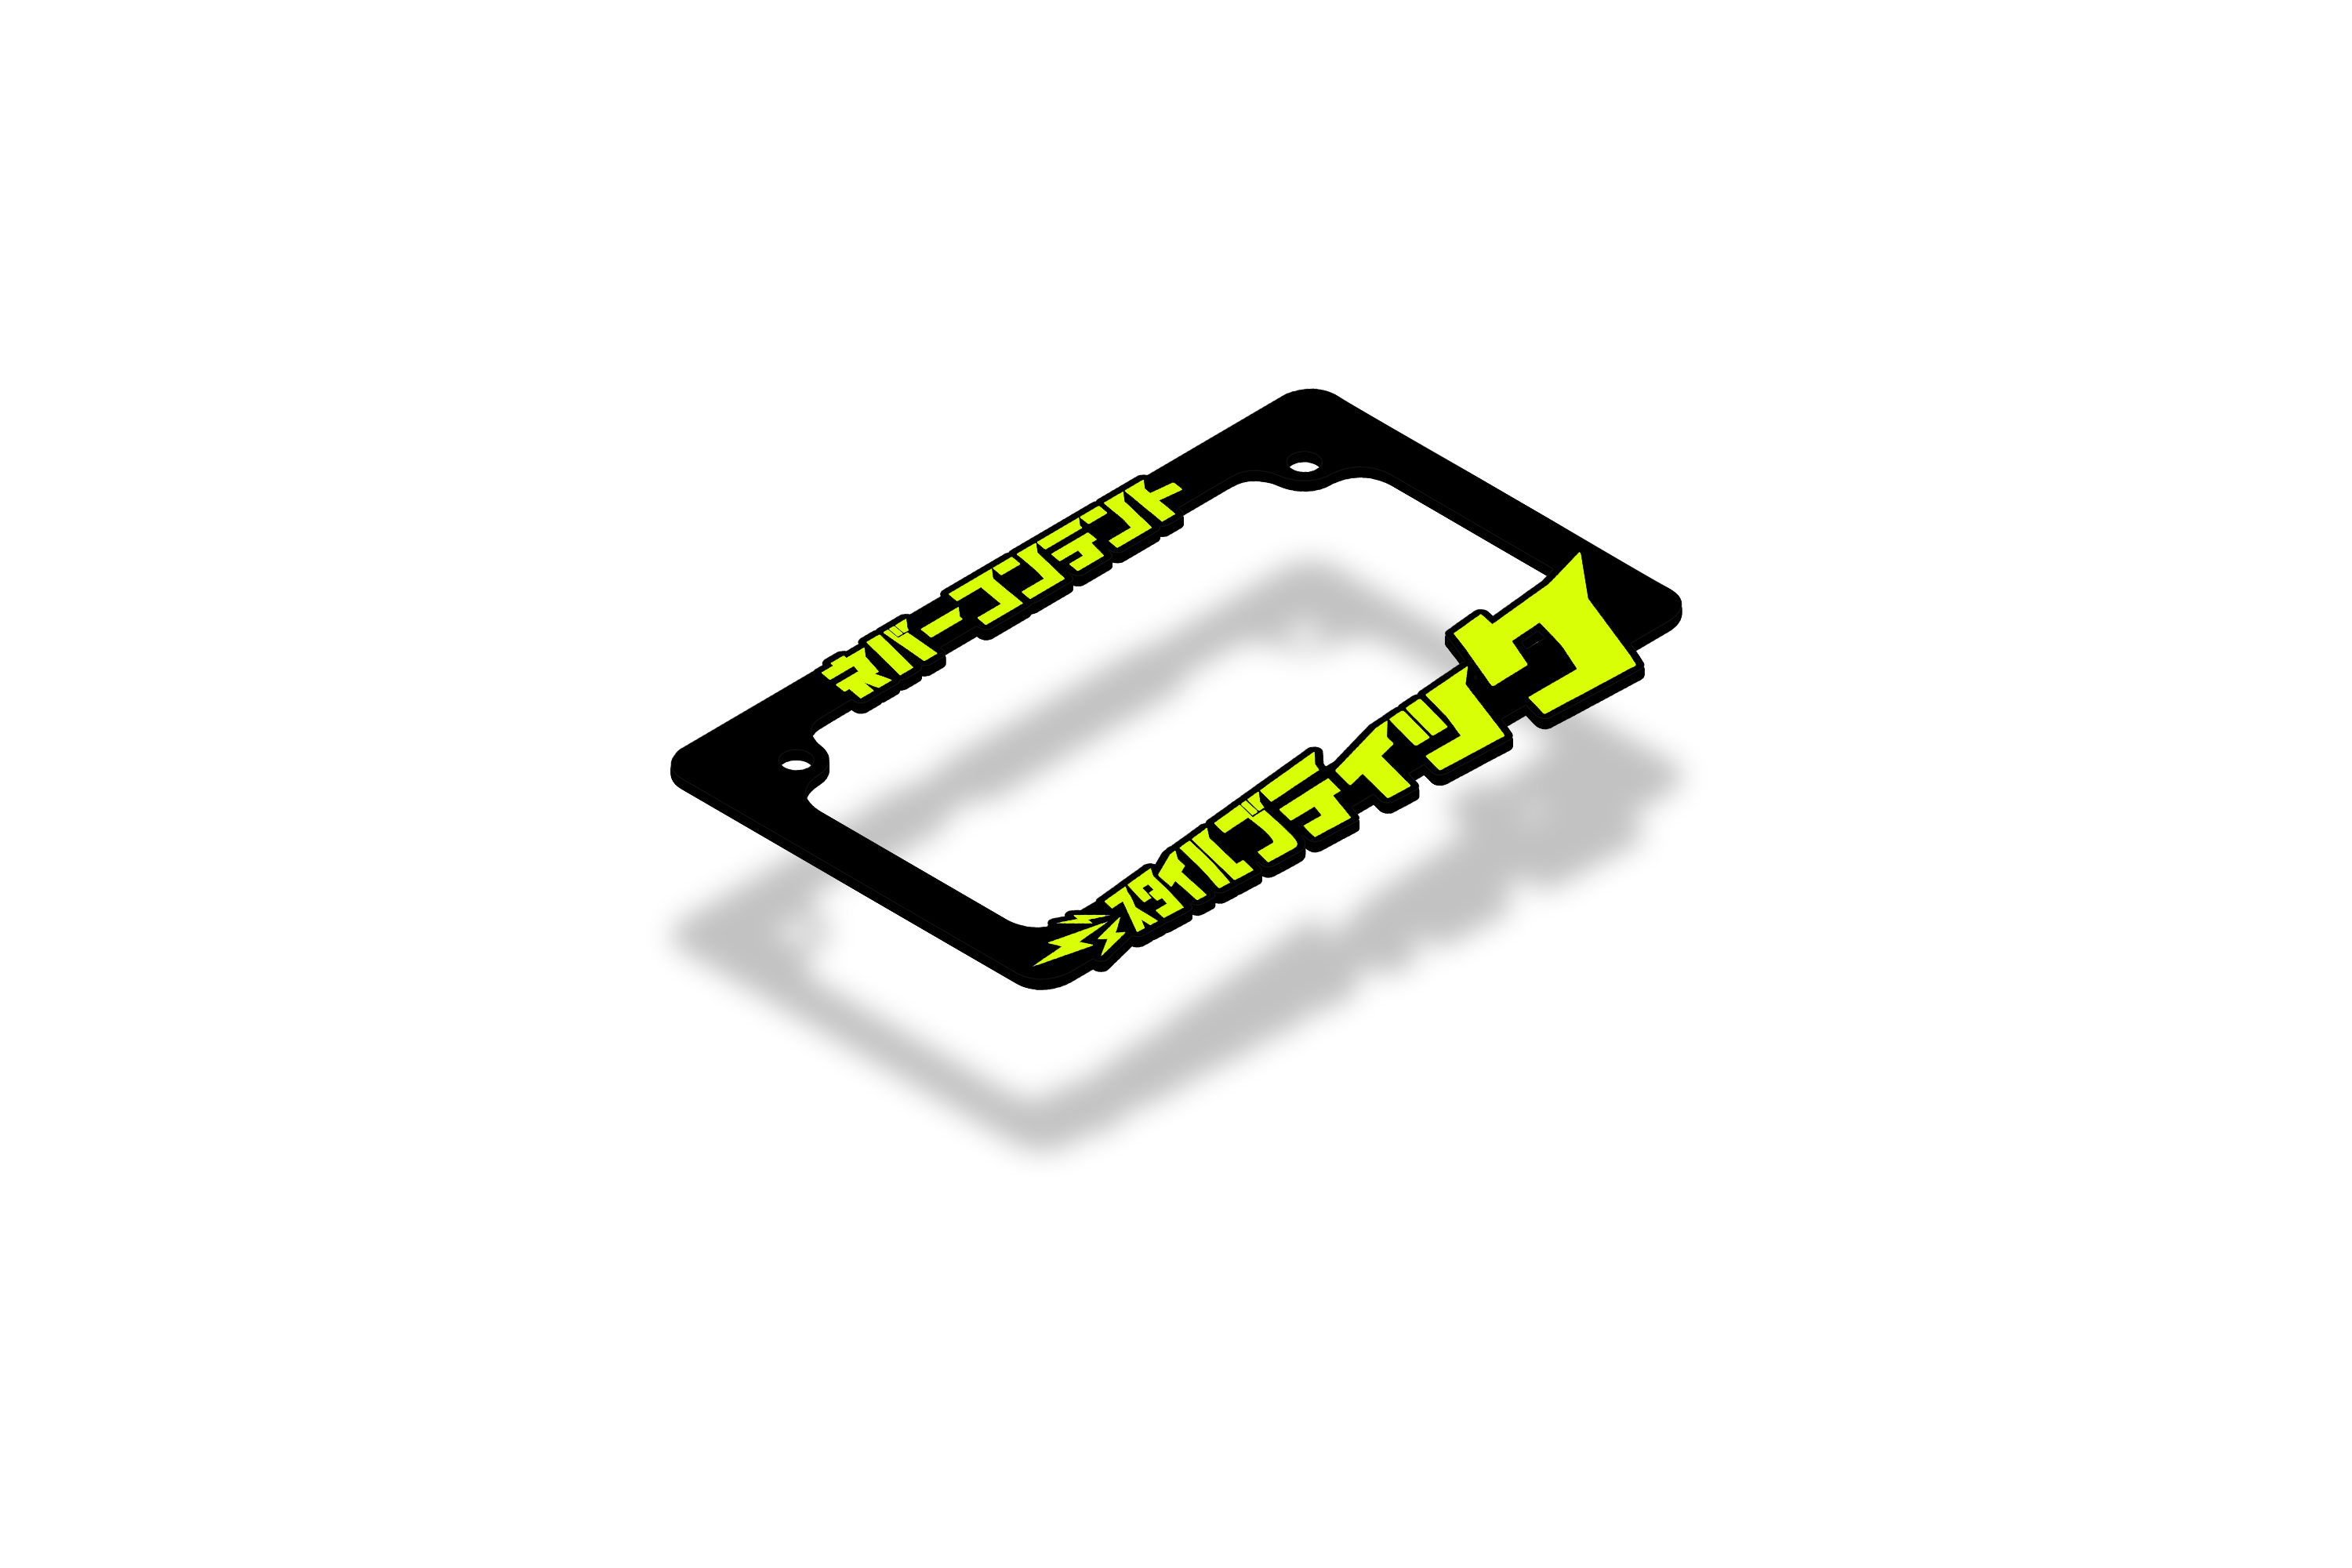 Style Boutique - Scooter / Motorcycle Plate Frame (HIGHLIGHTER YELLOW TEXT)